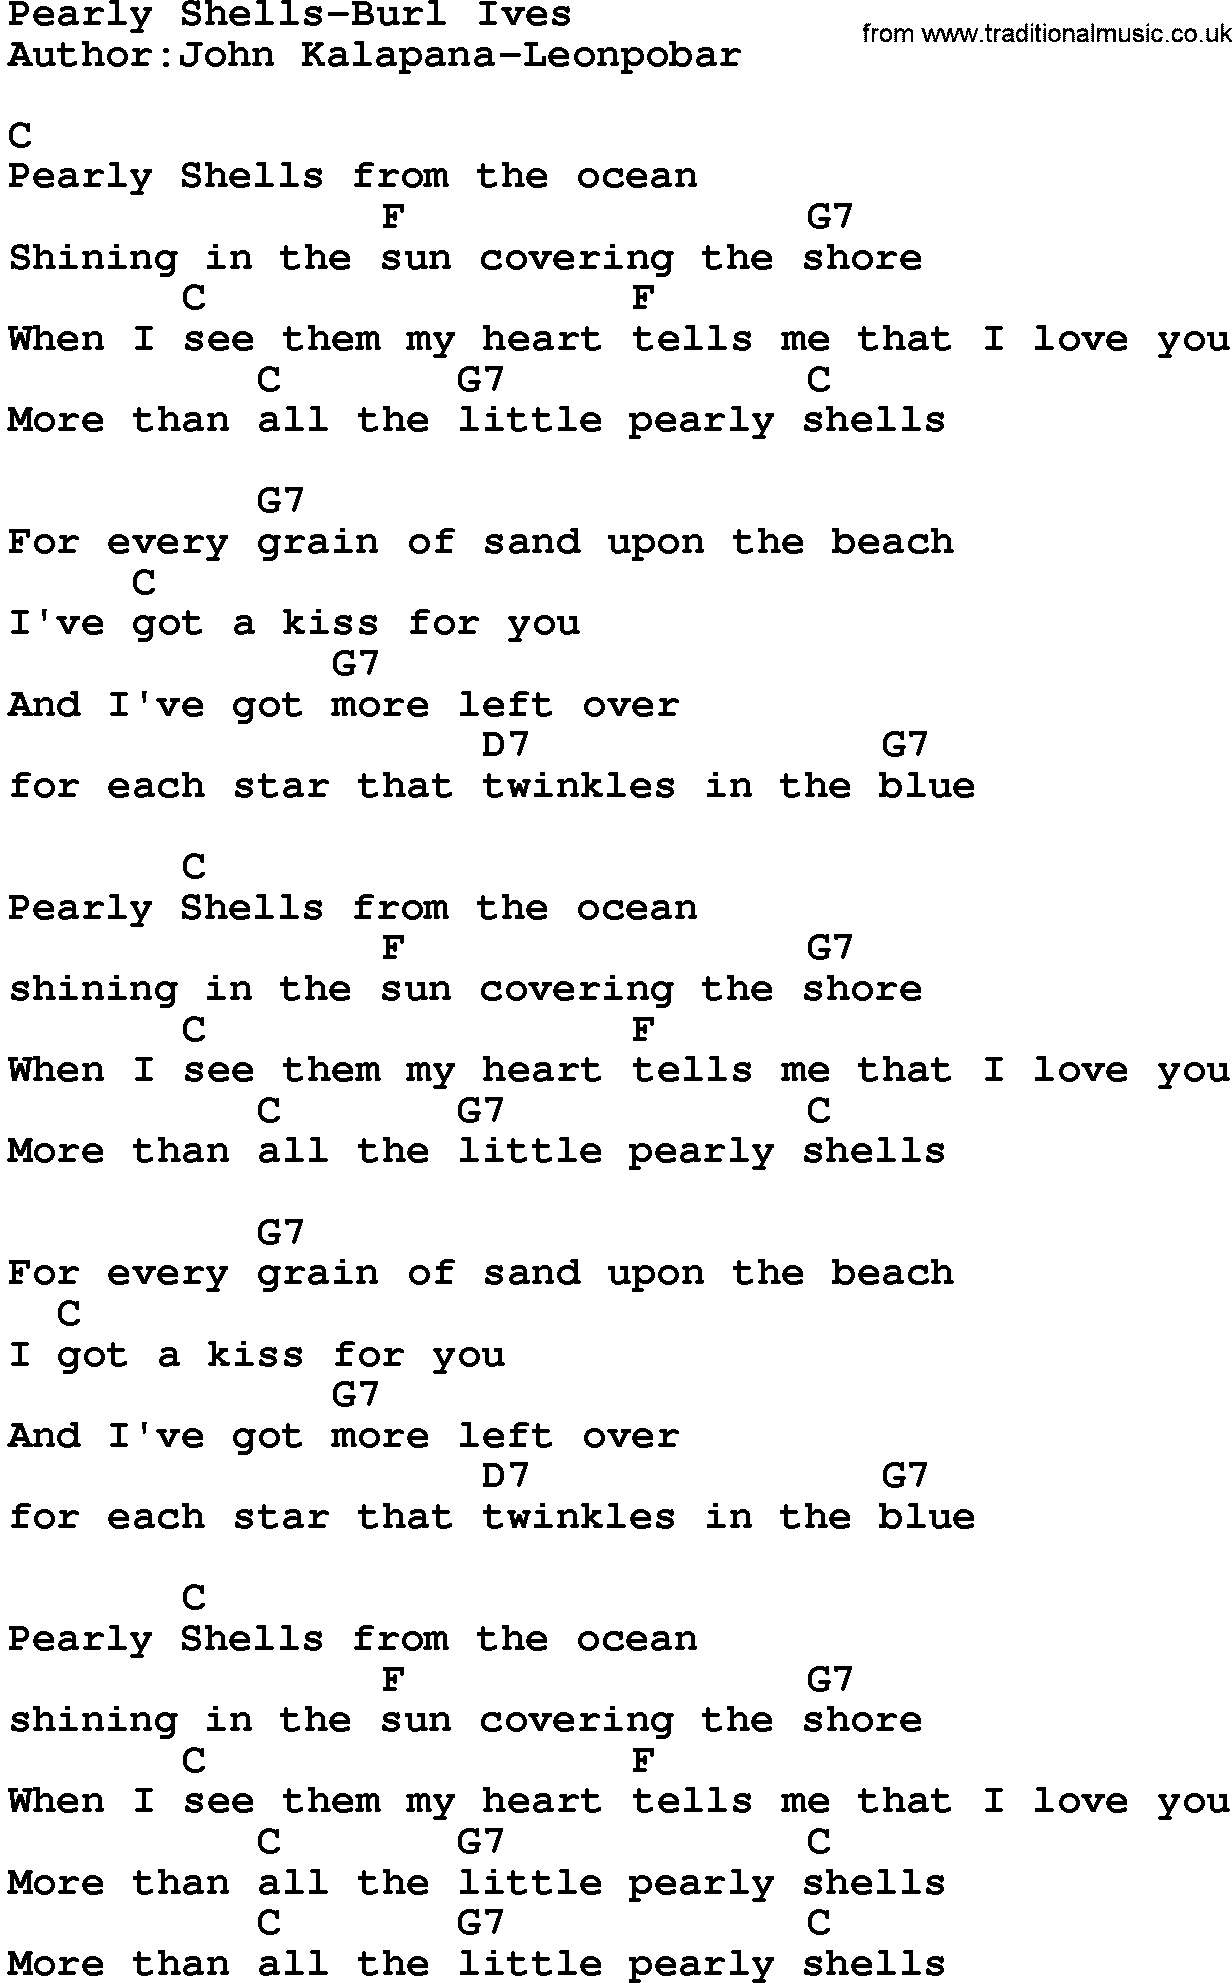 Country music song: Pearly Shells-Burl Ives lyrics and chords